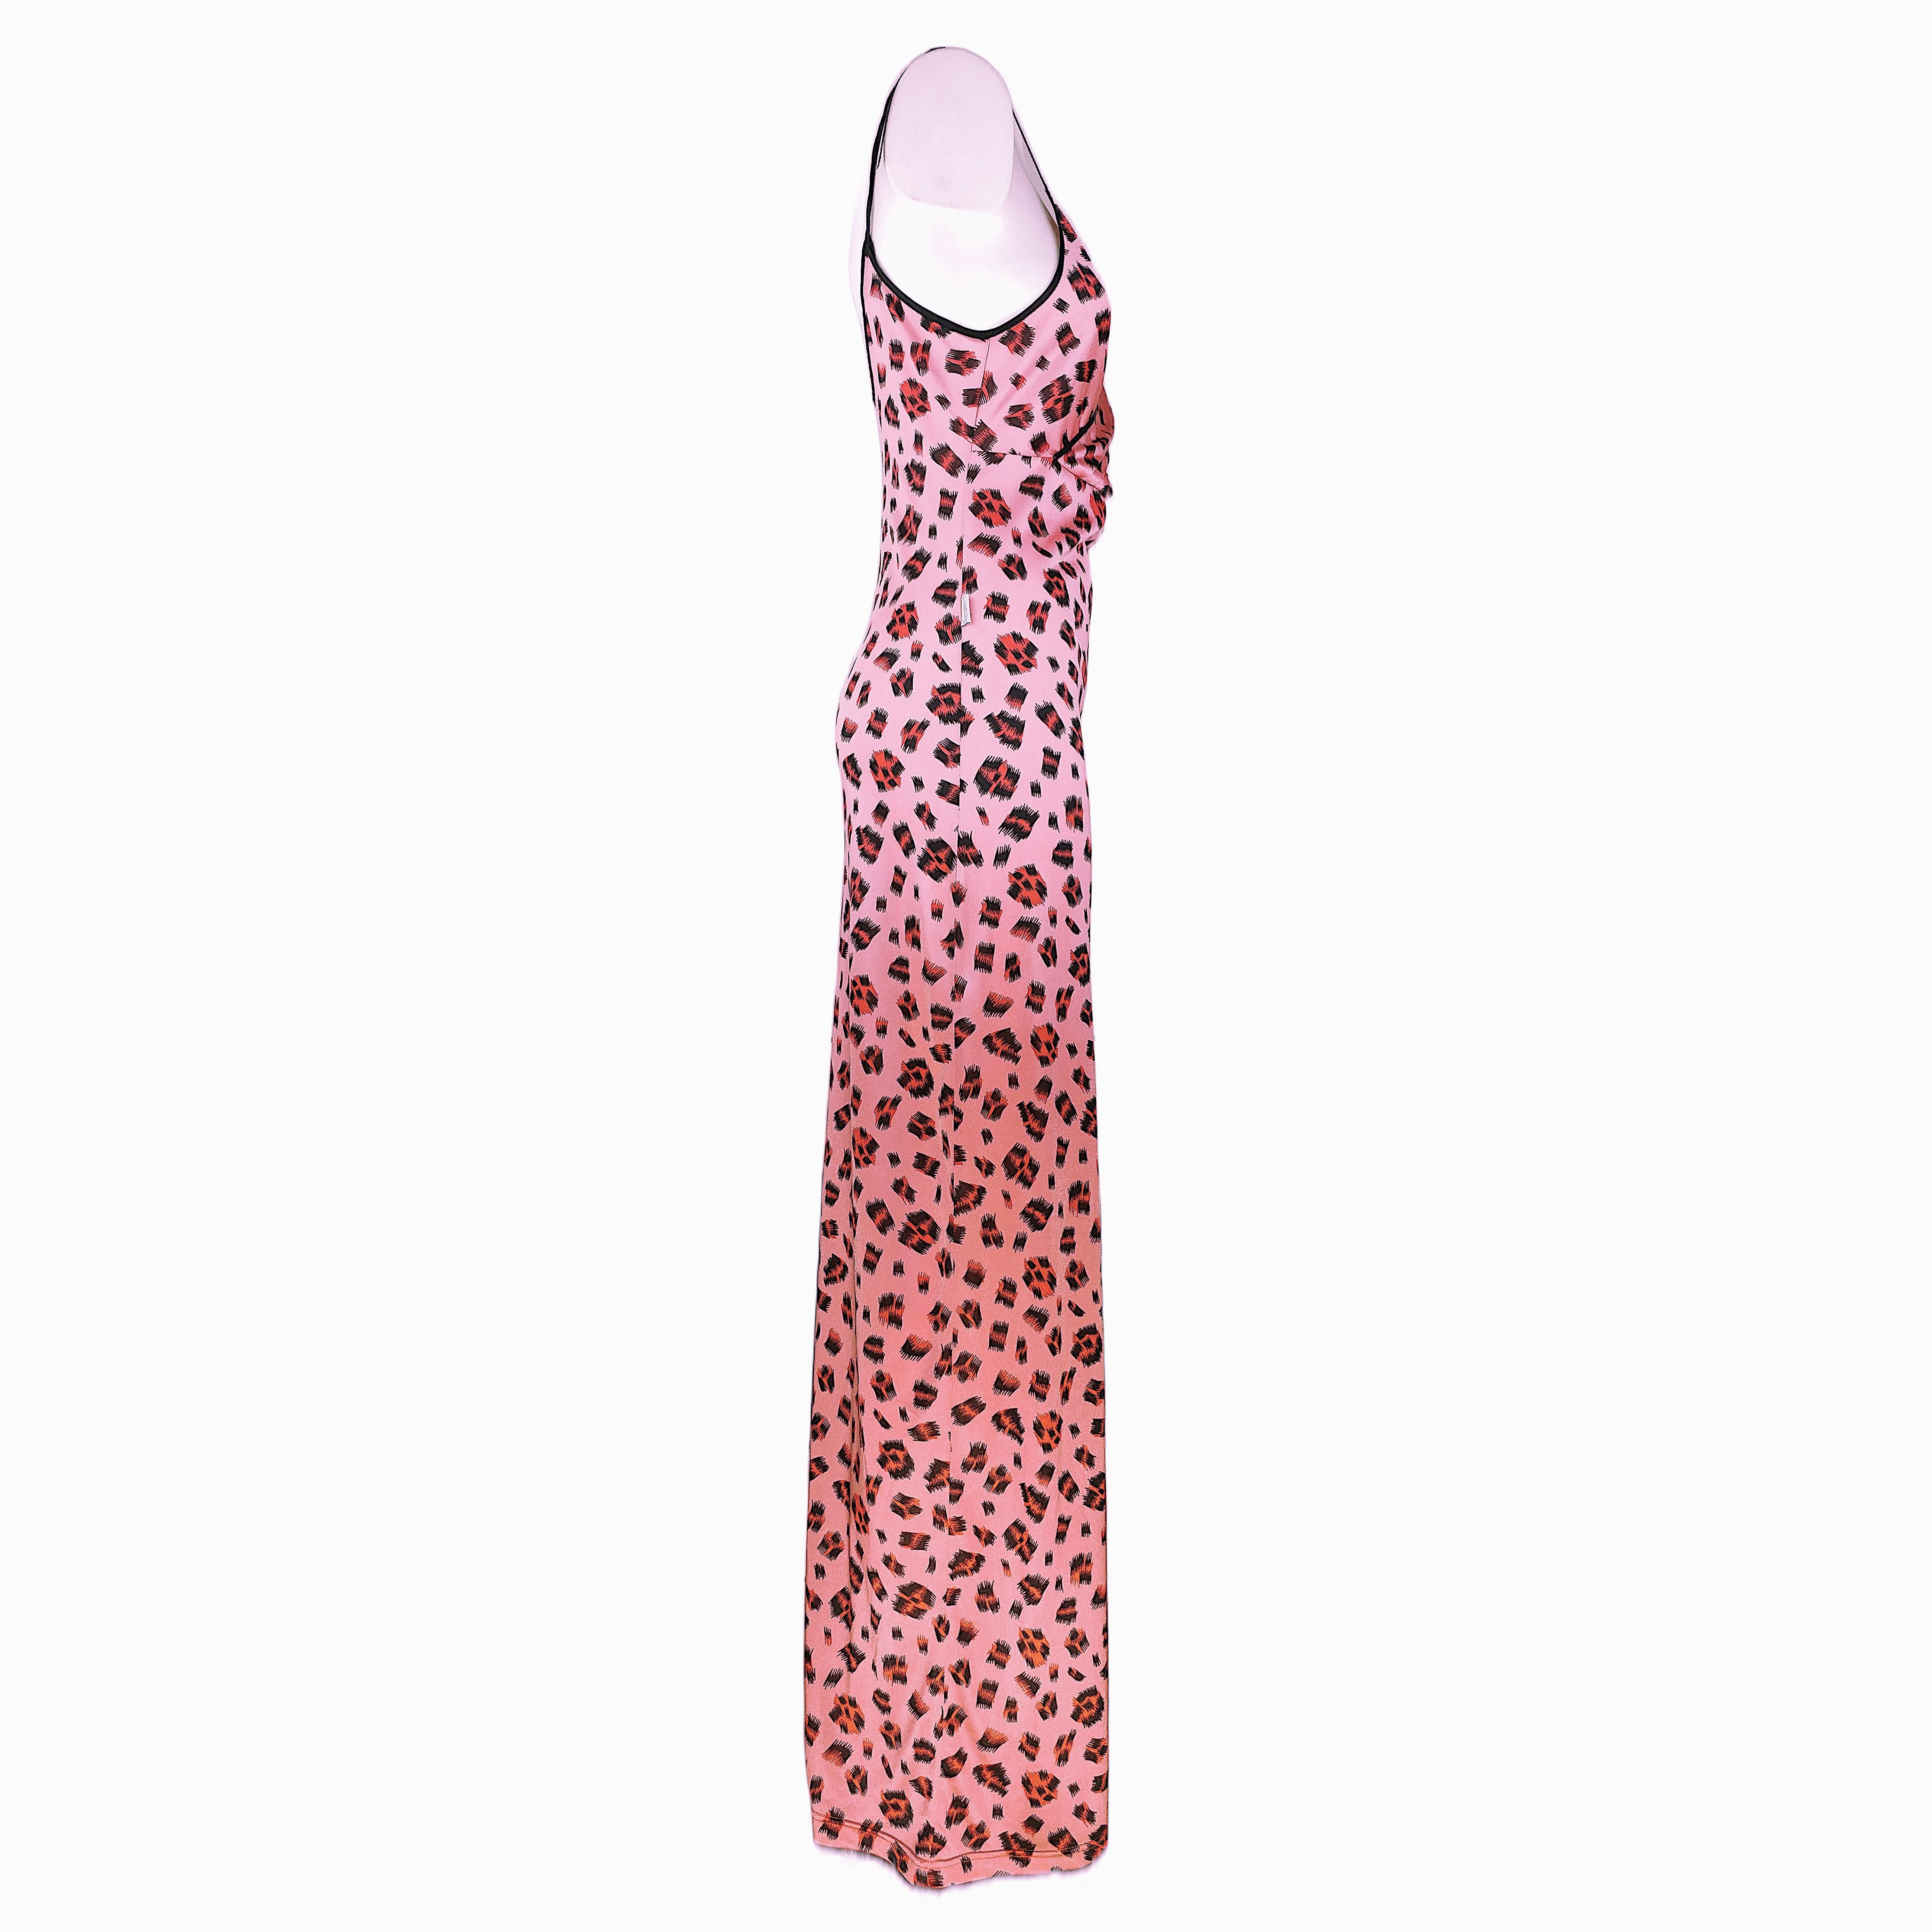 Directly from the 80s, here is a vintage long dress of a pink polyamide fabric with leopard print by the then iconic brand Fiorucci, founded and directed by Elio Fiorucci. This dress has adjustable shoulder straps and is in mint